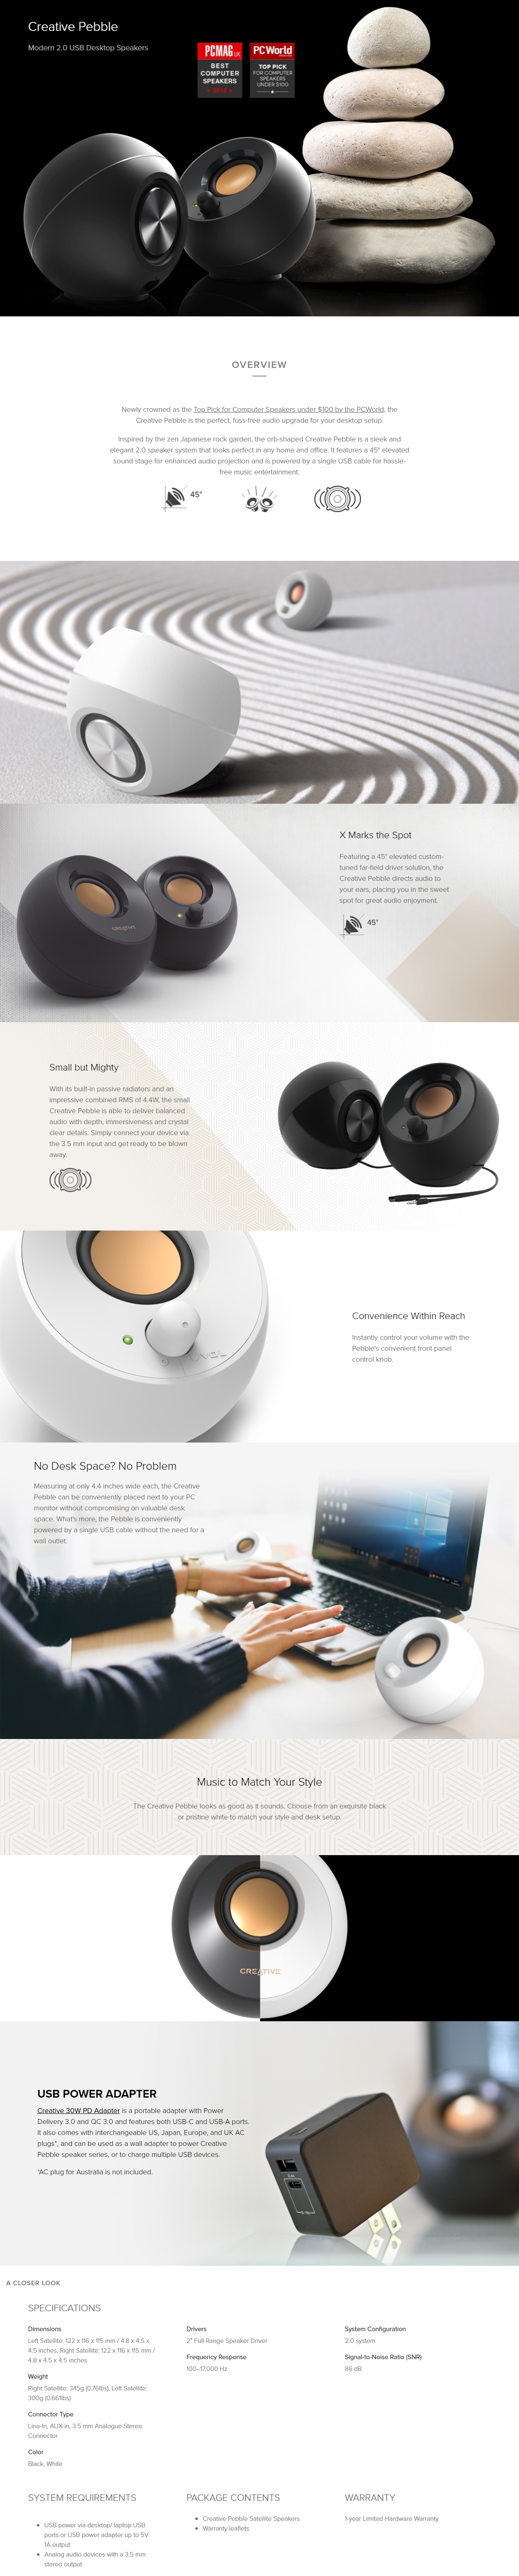 A large marketing image providing additional information about the product Creative Pebble 2.0 Speaker USB - White - Additional alt info not provided